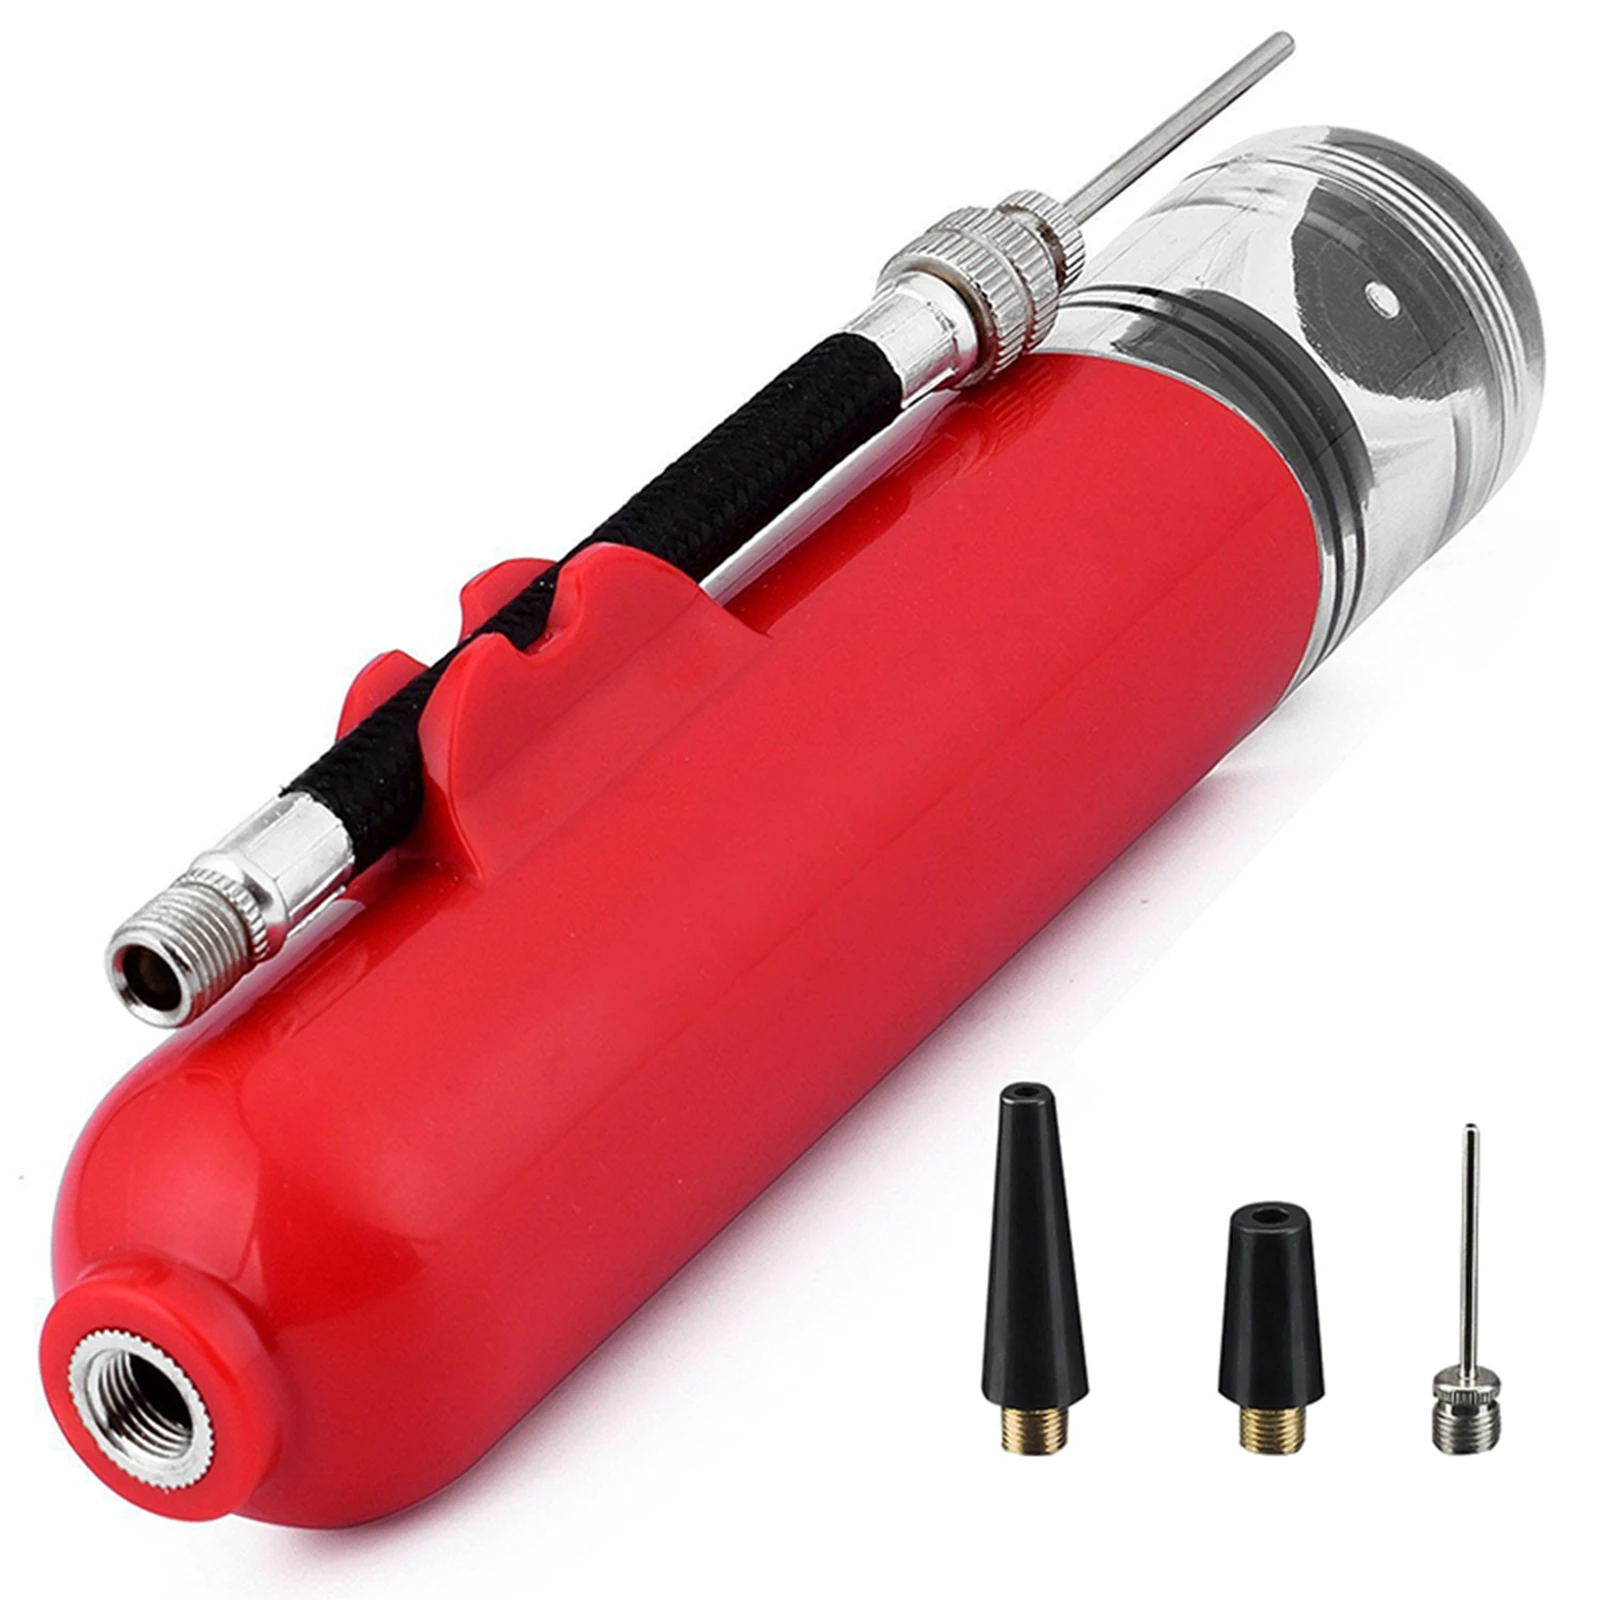 

Portable Air Pump Set Ball Pump Inflator Kit Needle Nozzle Extension Hose For Soccer Basketball Football Volleyball